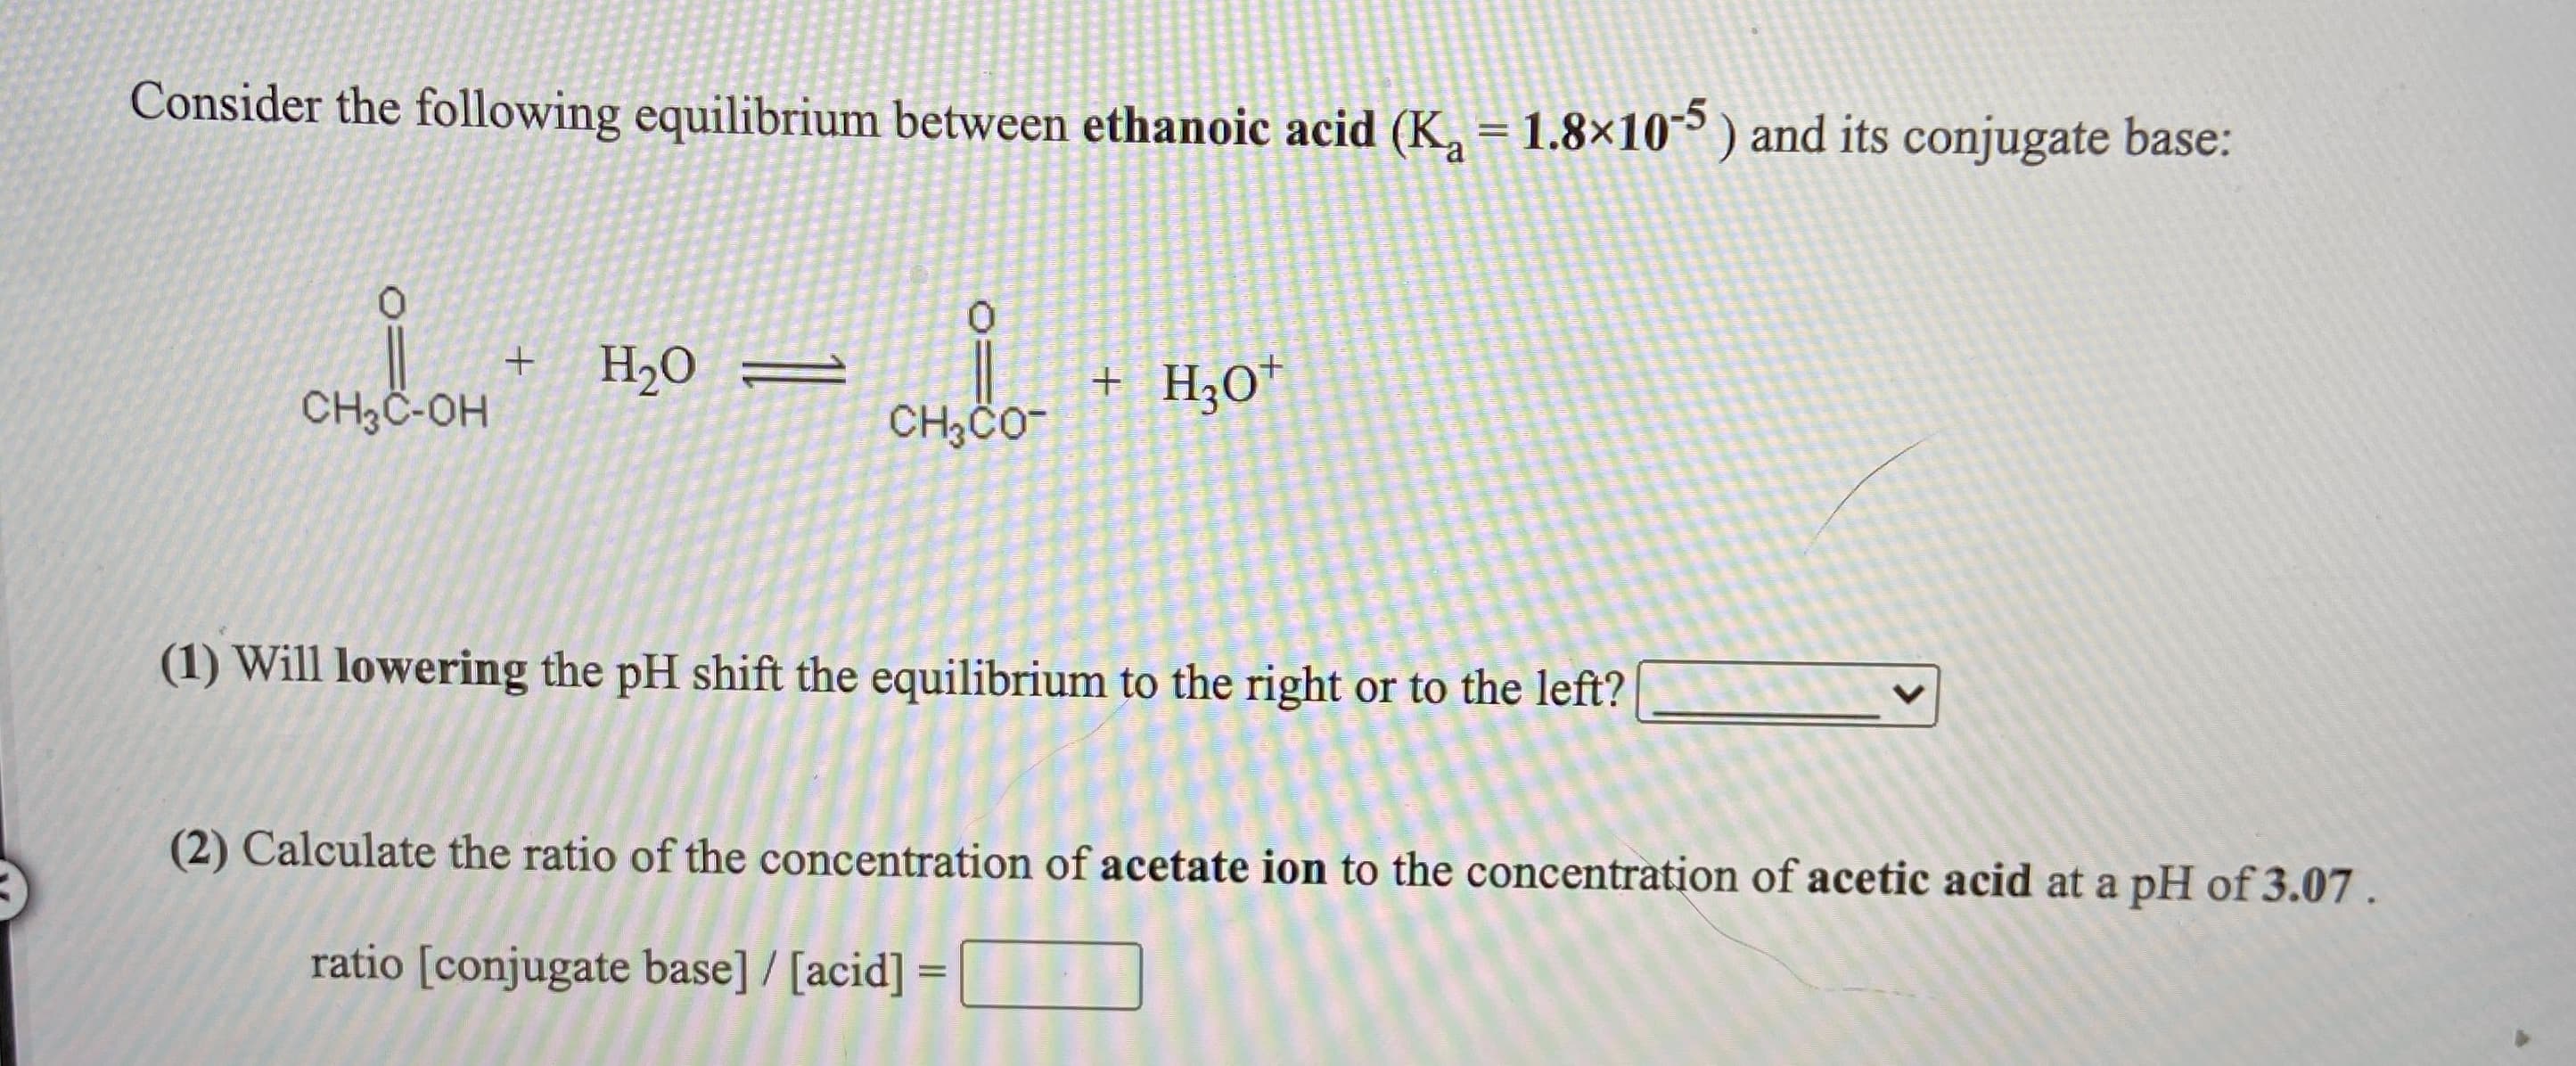 Consider the following equilibrium between ethanoic acid (K, = 1.8×10 ) and its conjugate base:
H2O
+ H;O*
CH3C-OH
(1) Will lowering the pH shift the equilibrium to the right or to the left?
(2) Calculate the ratio of the concentration of acetate ion to the concentration of acetic acid at a pH of 3.07.
ratio [conjugate base] / [acid] =
